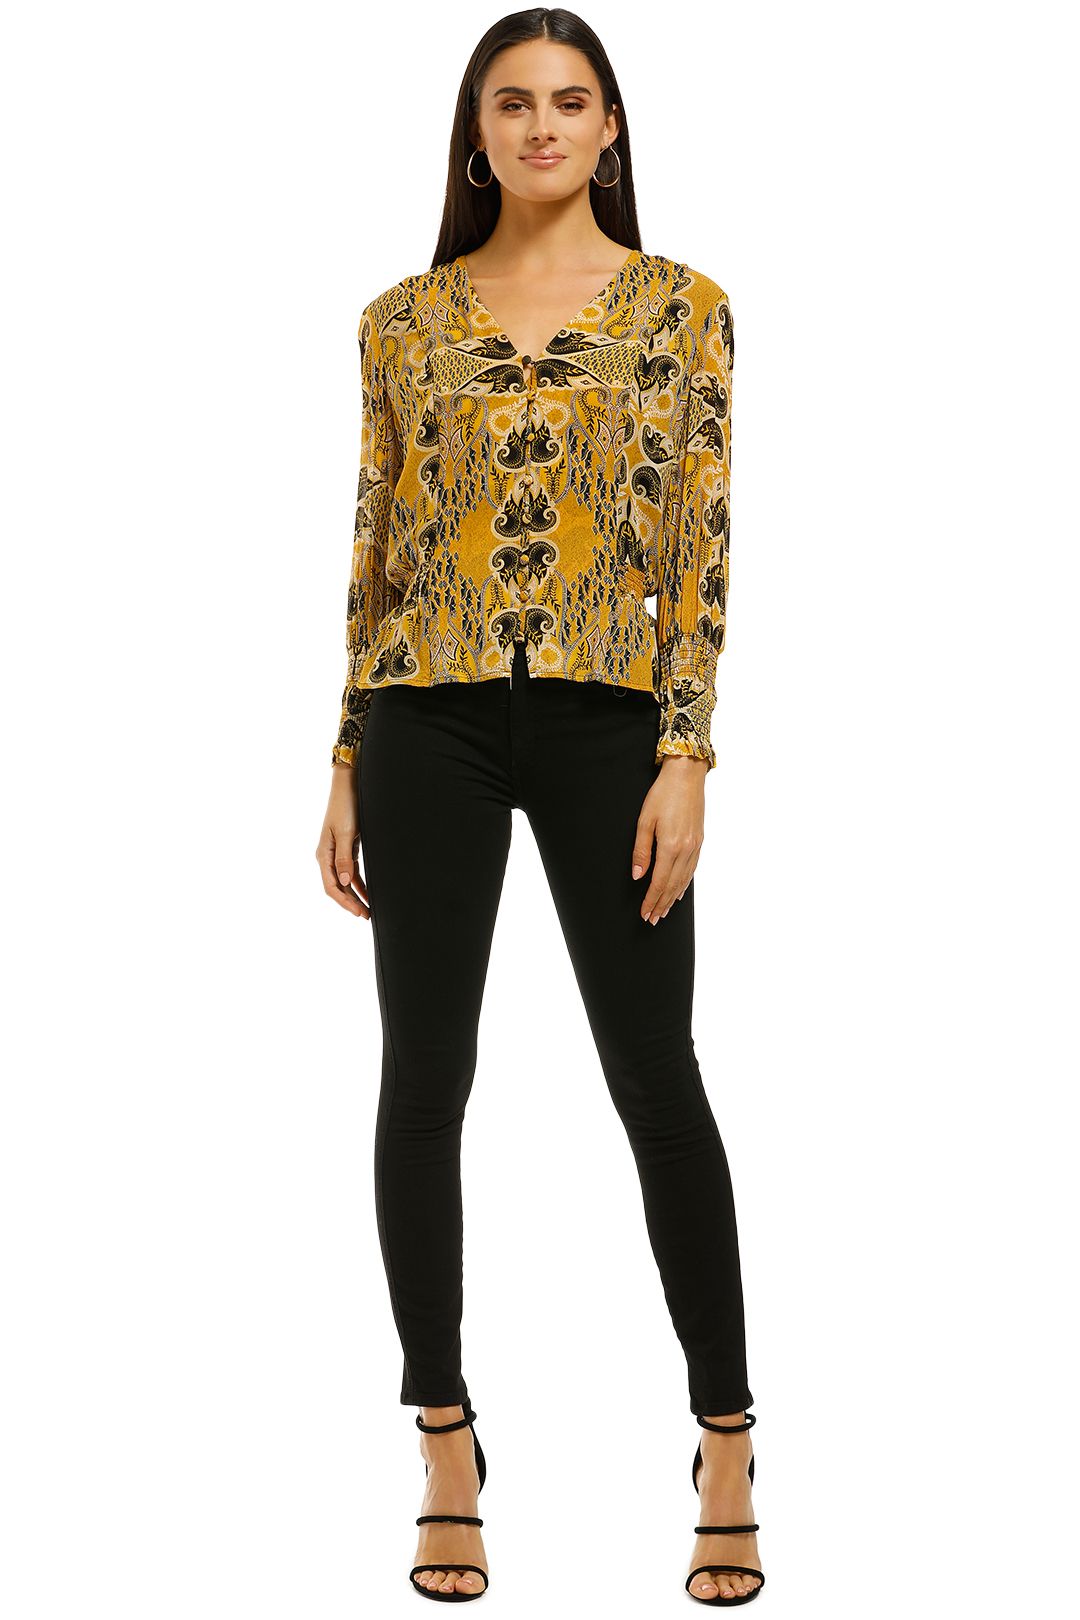 Ministry of Style - Gold Light Shirt - Front